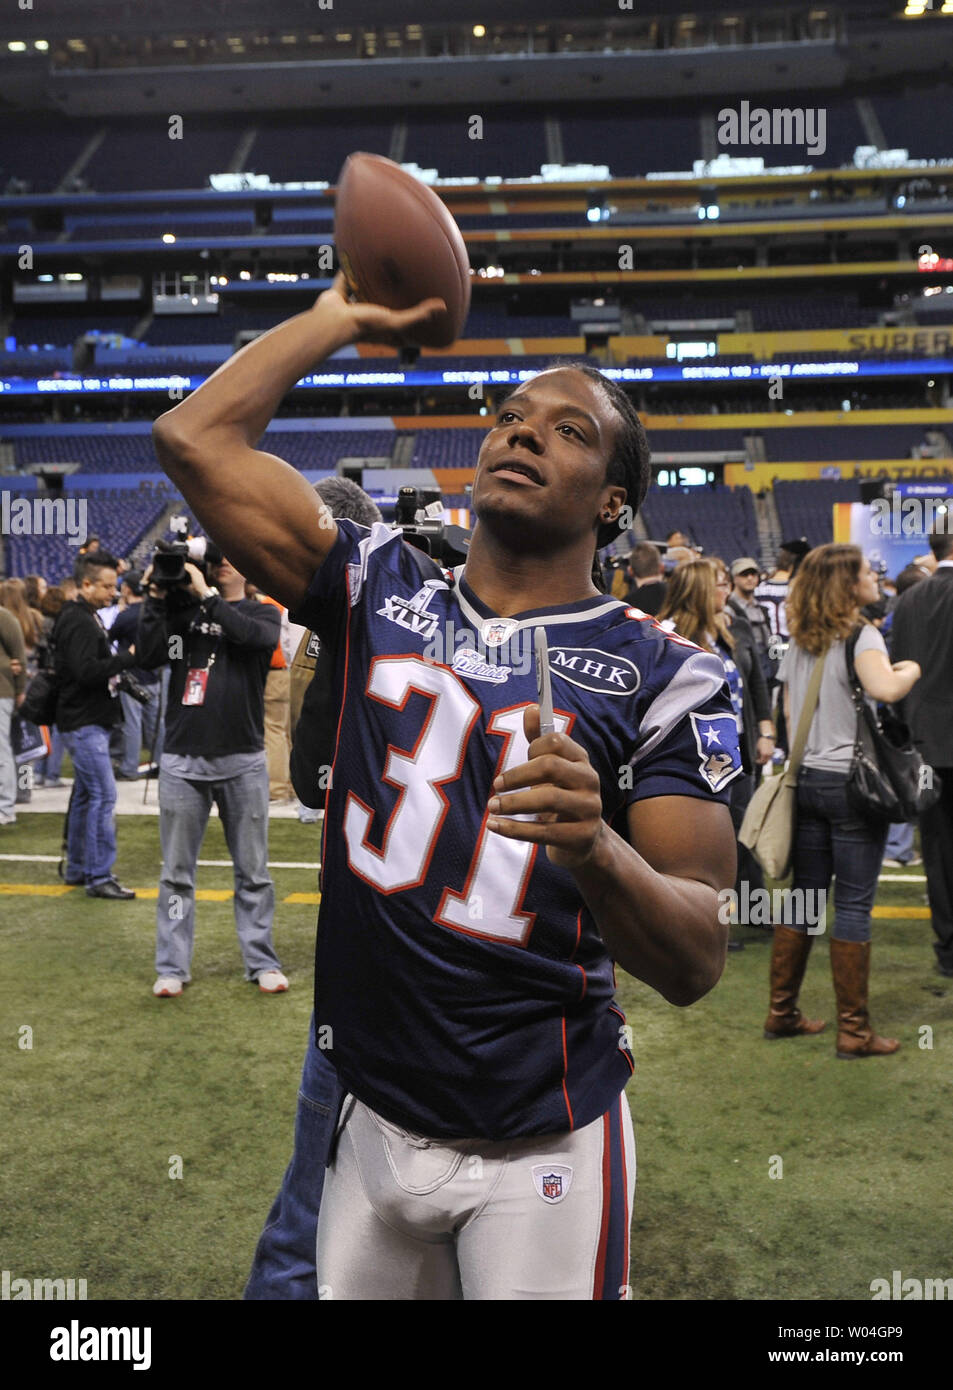 New England Patriots free safety Sergio Brown throws a ball back into the stands after signing an autograph for a fan on Media Day during Super Bowl week on January 31, 2012